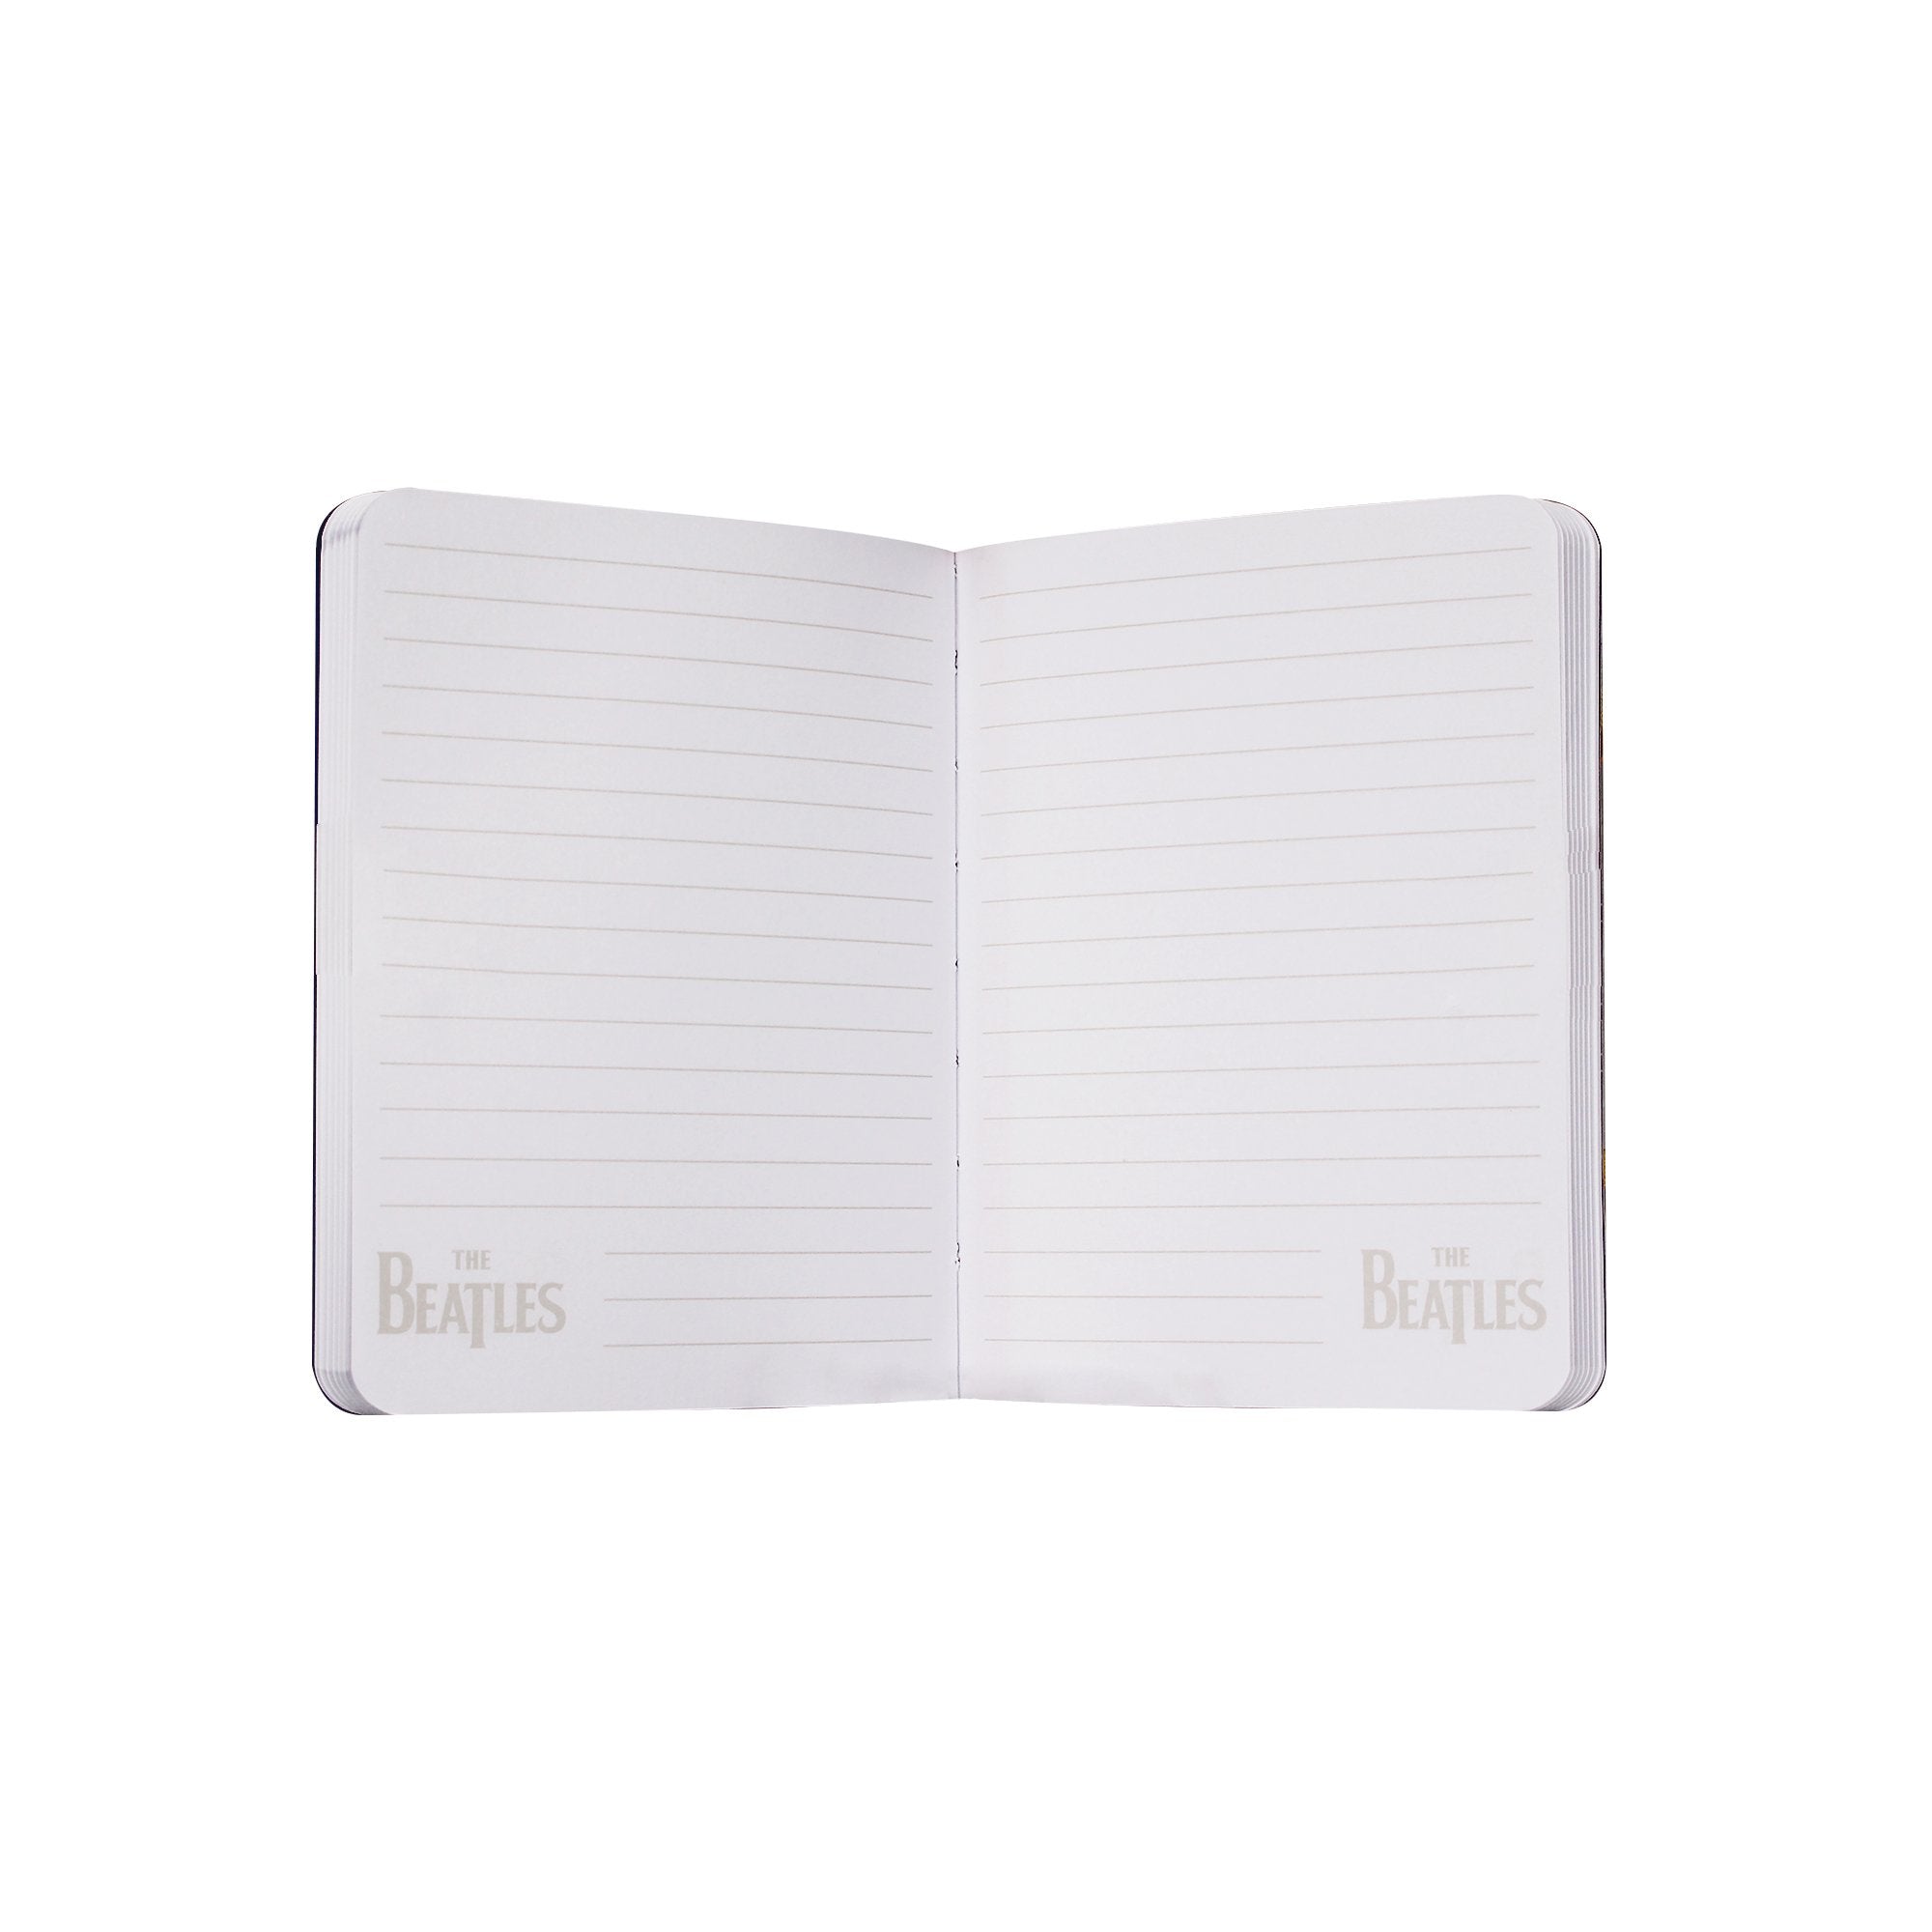 A6 Notebook (Softcover) - The Beatles (Sgt. Pepper)